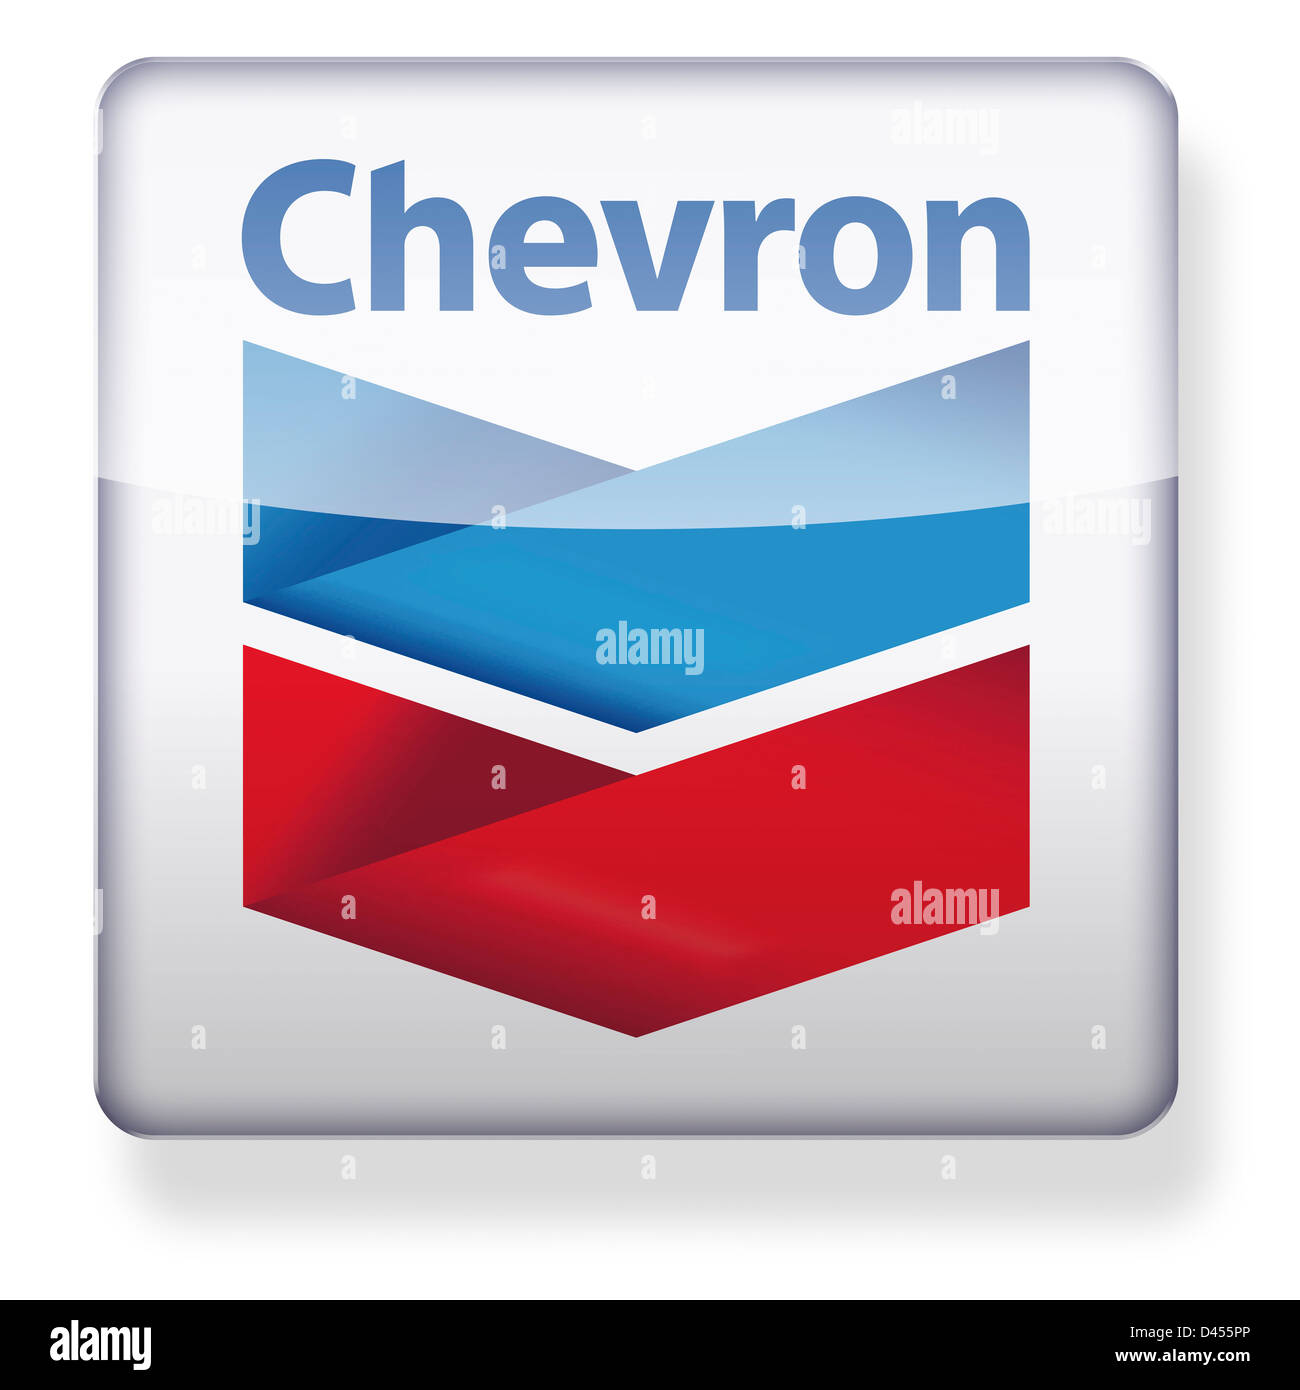 Chevron logo as an app icon. Clipping path included. Stock Photo